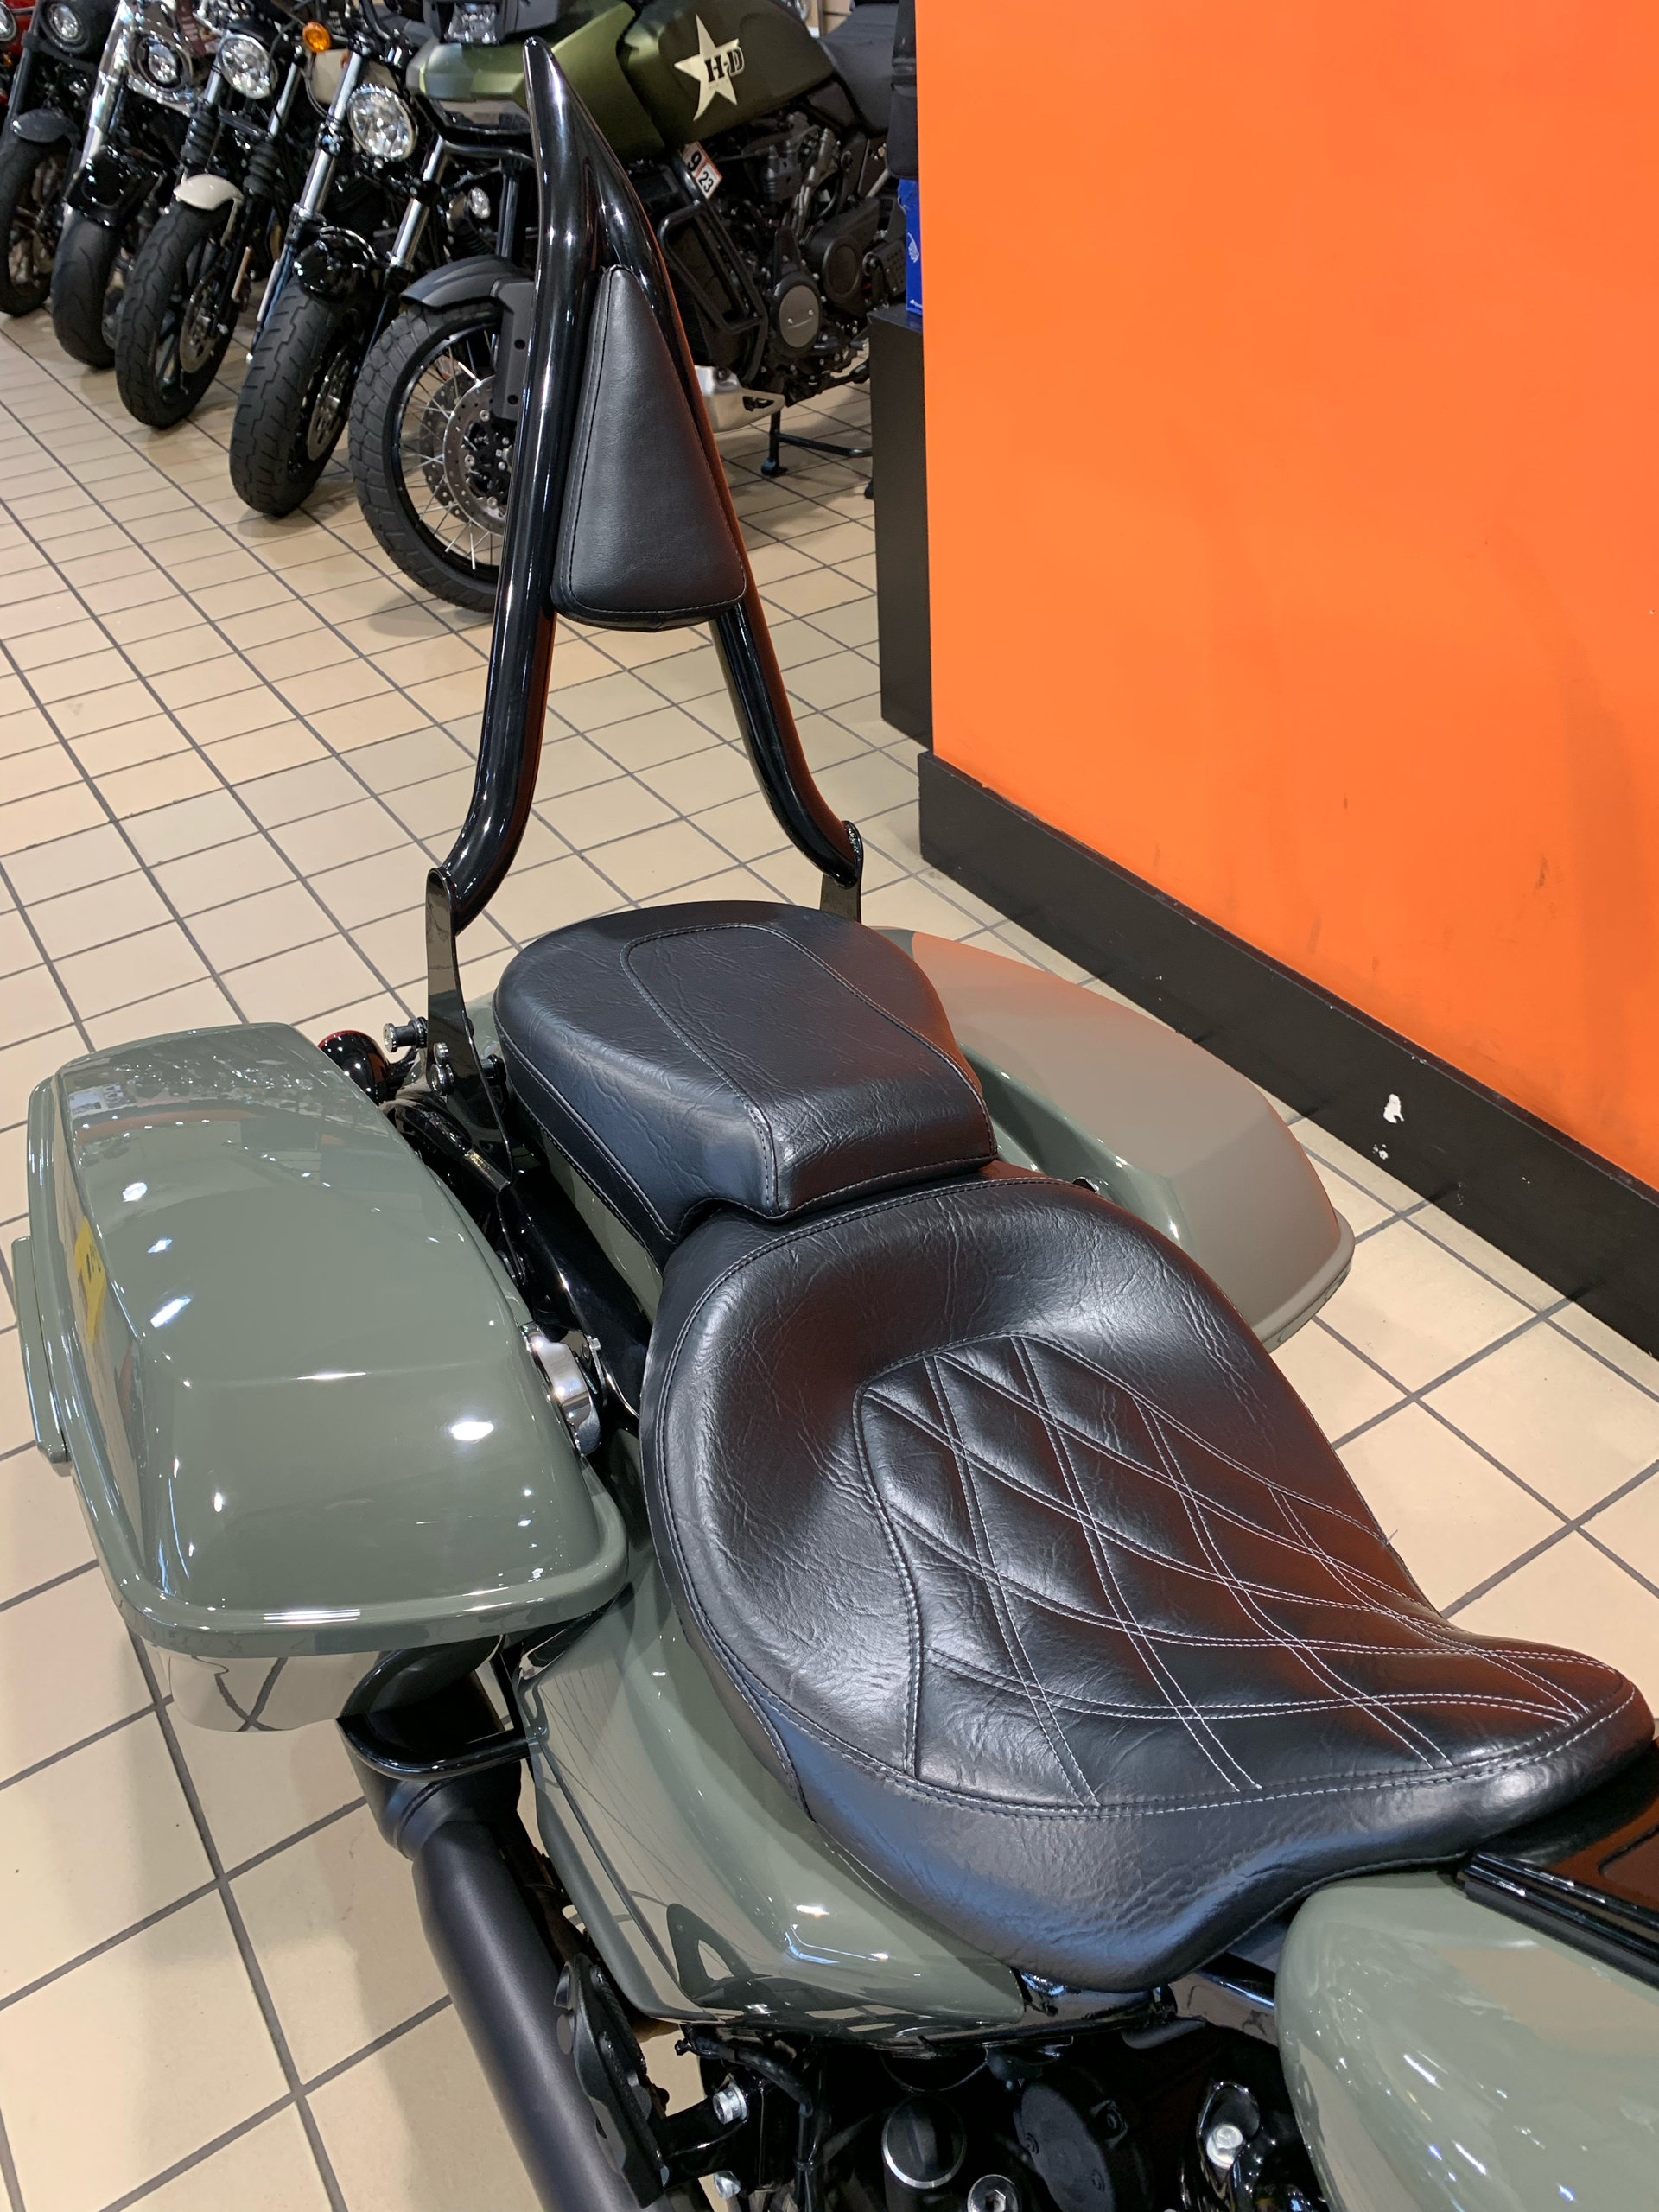 2021 Harley-Davidson ROAD KING SPECIAL in Dumfries, Virginia - Photo 3